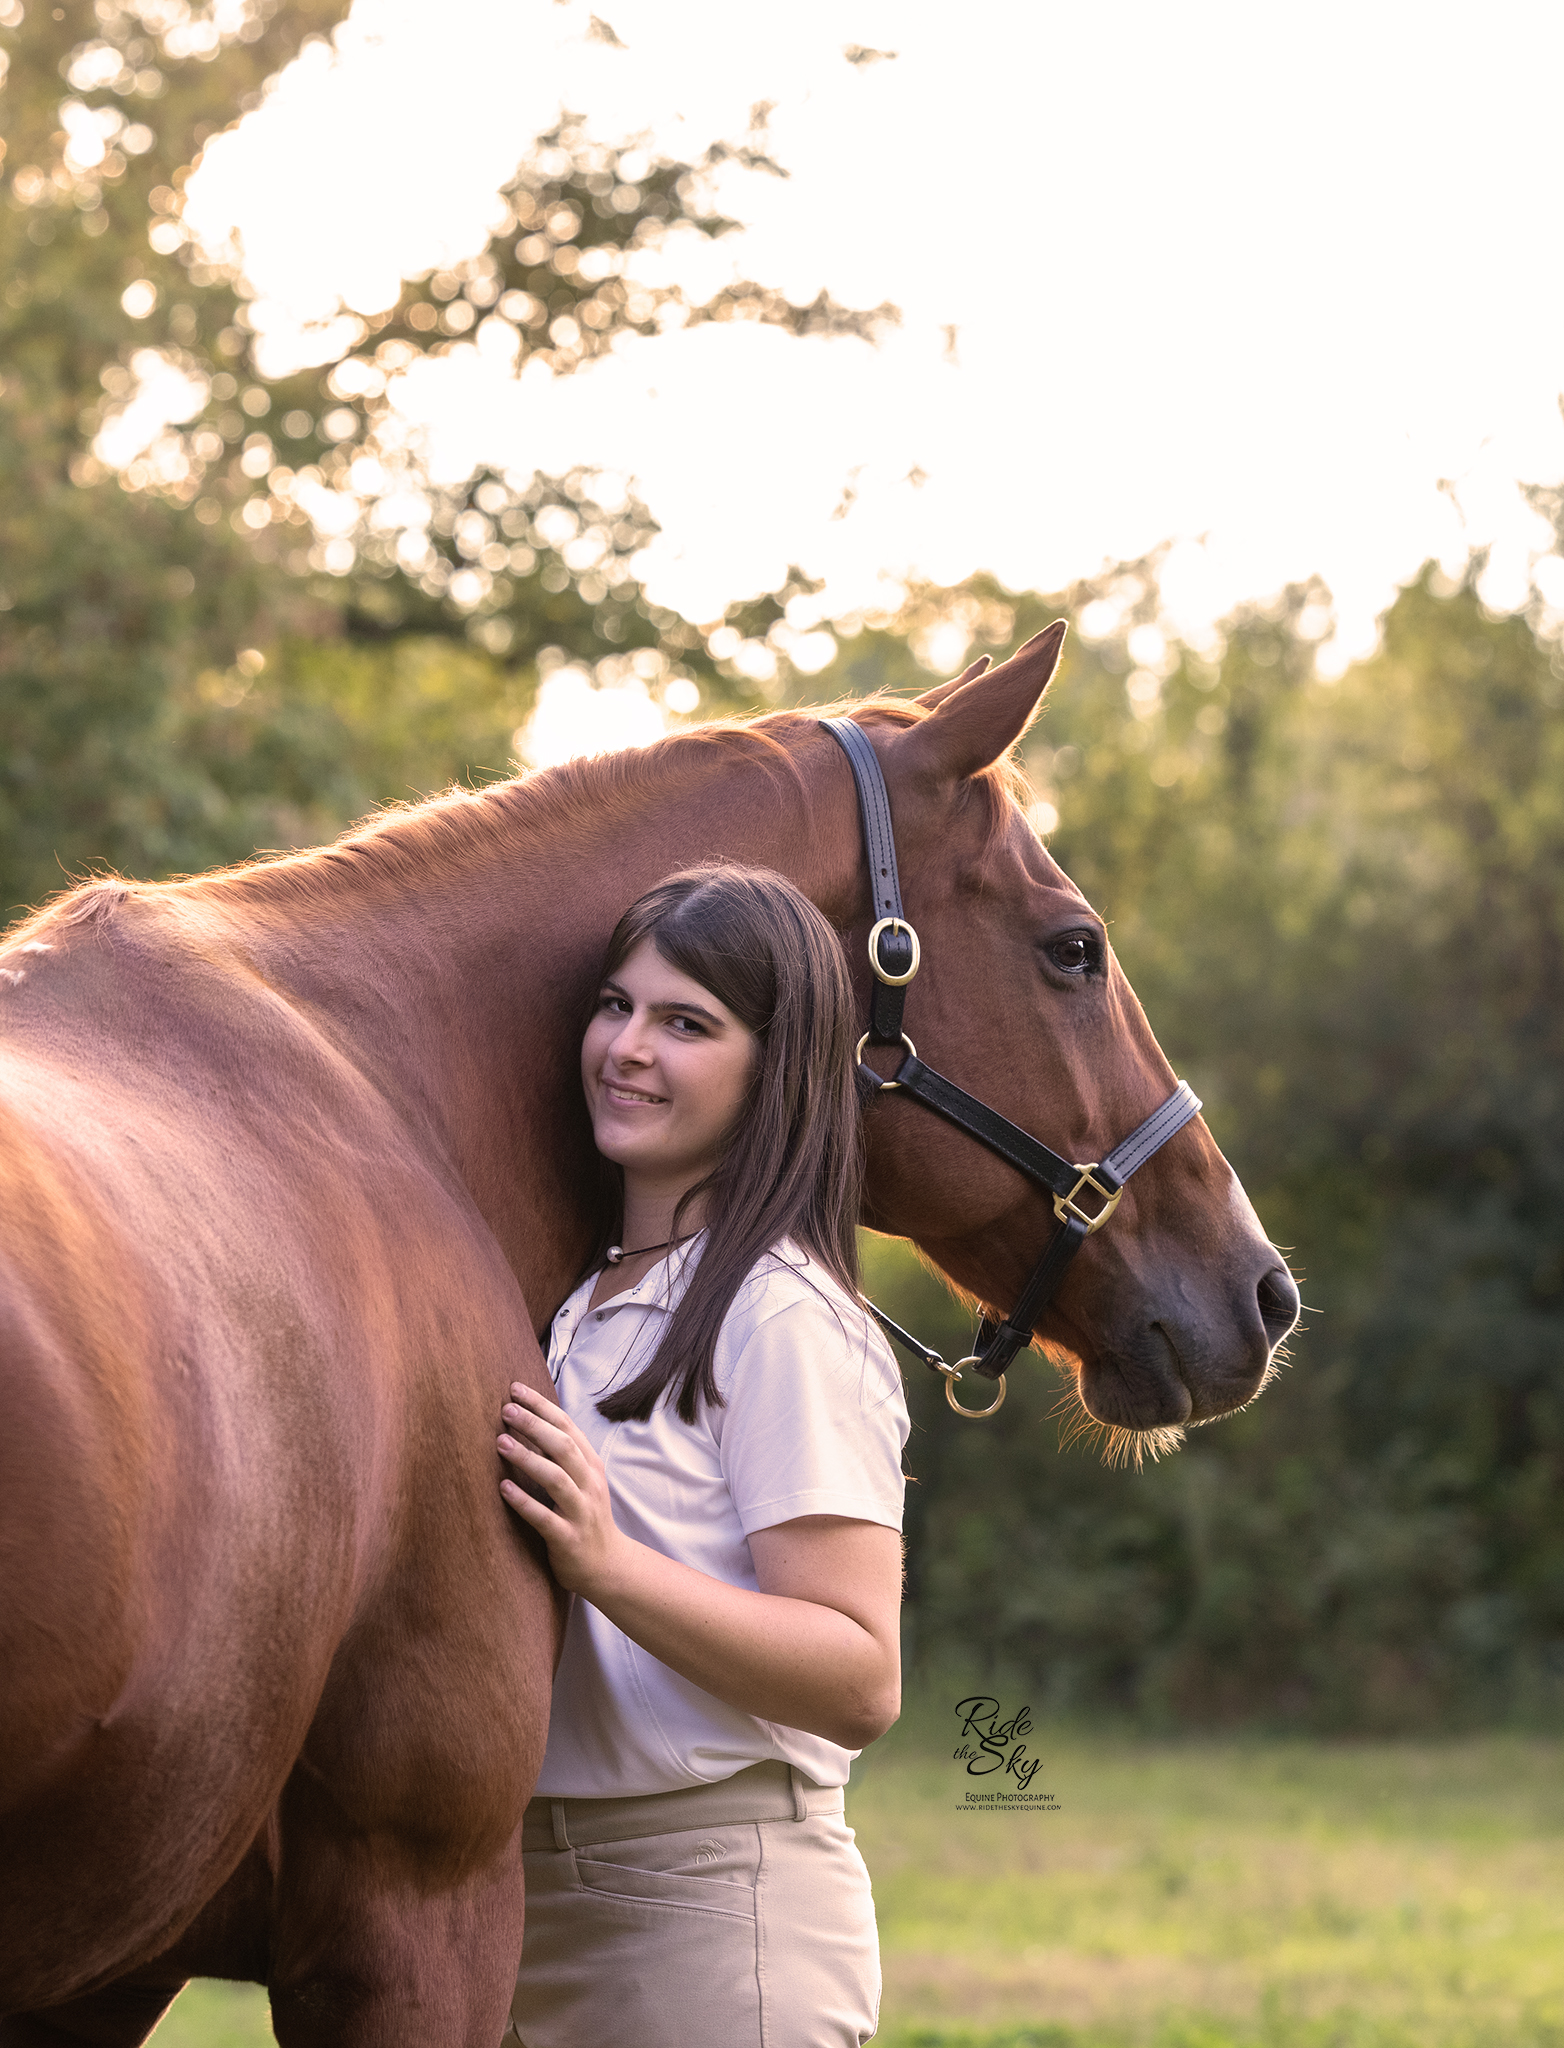 High School Senior casually dressed photographed with her appendix horse for senior pictures